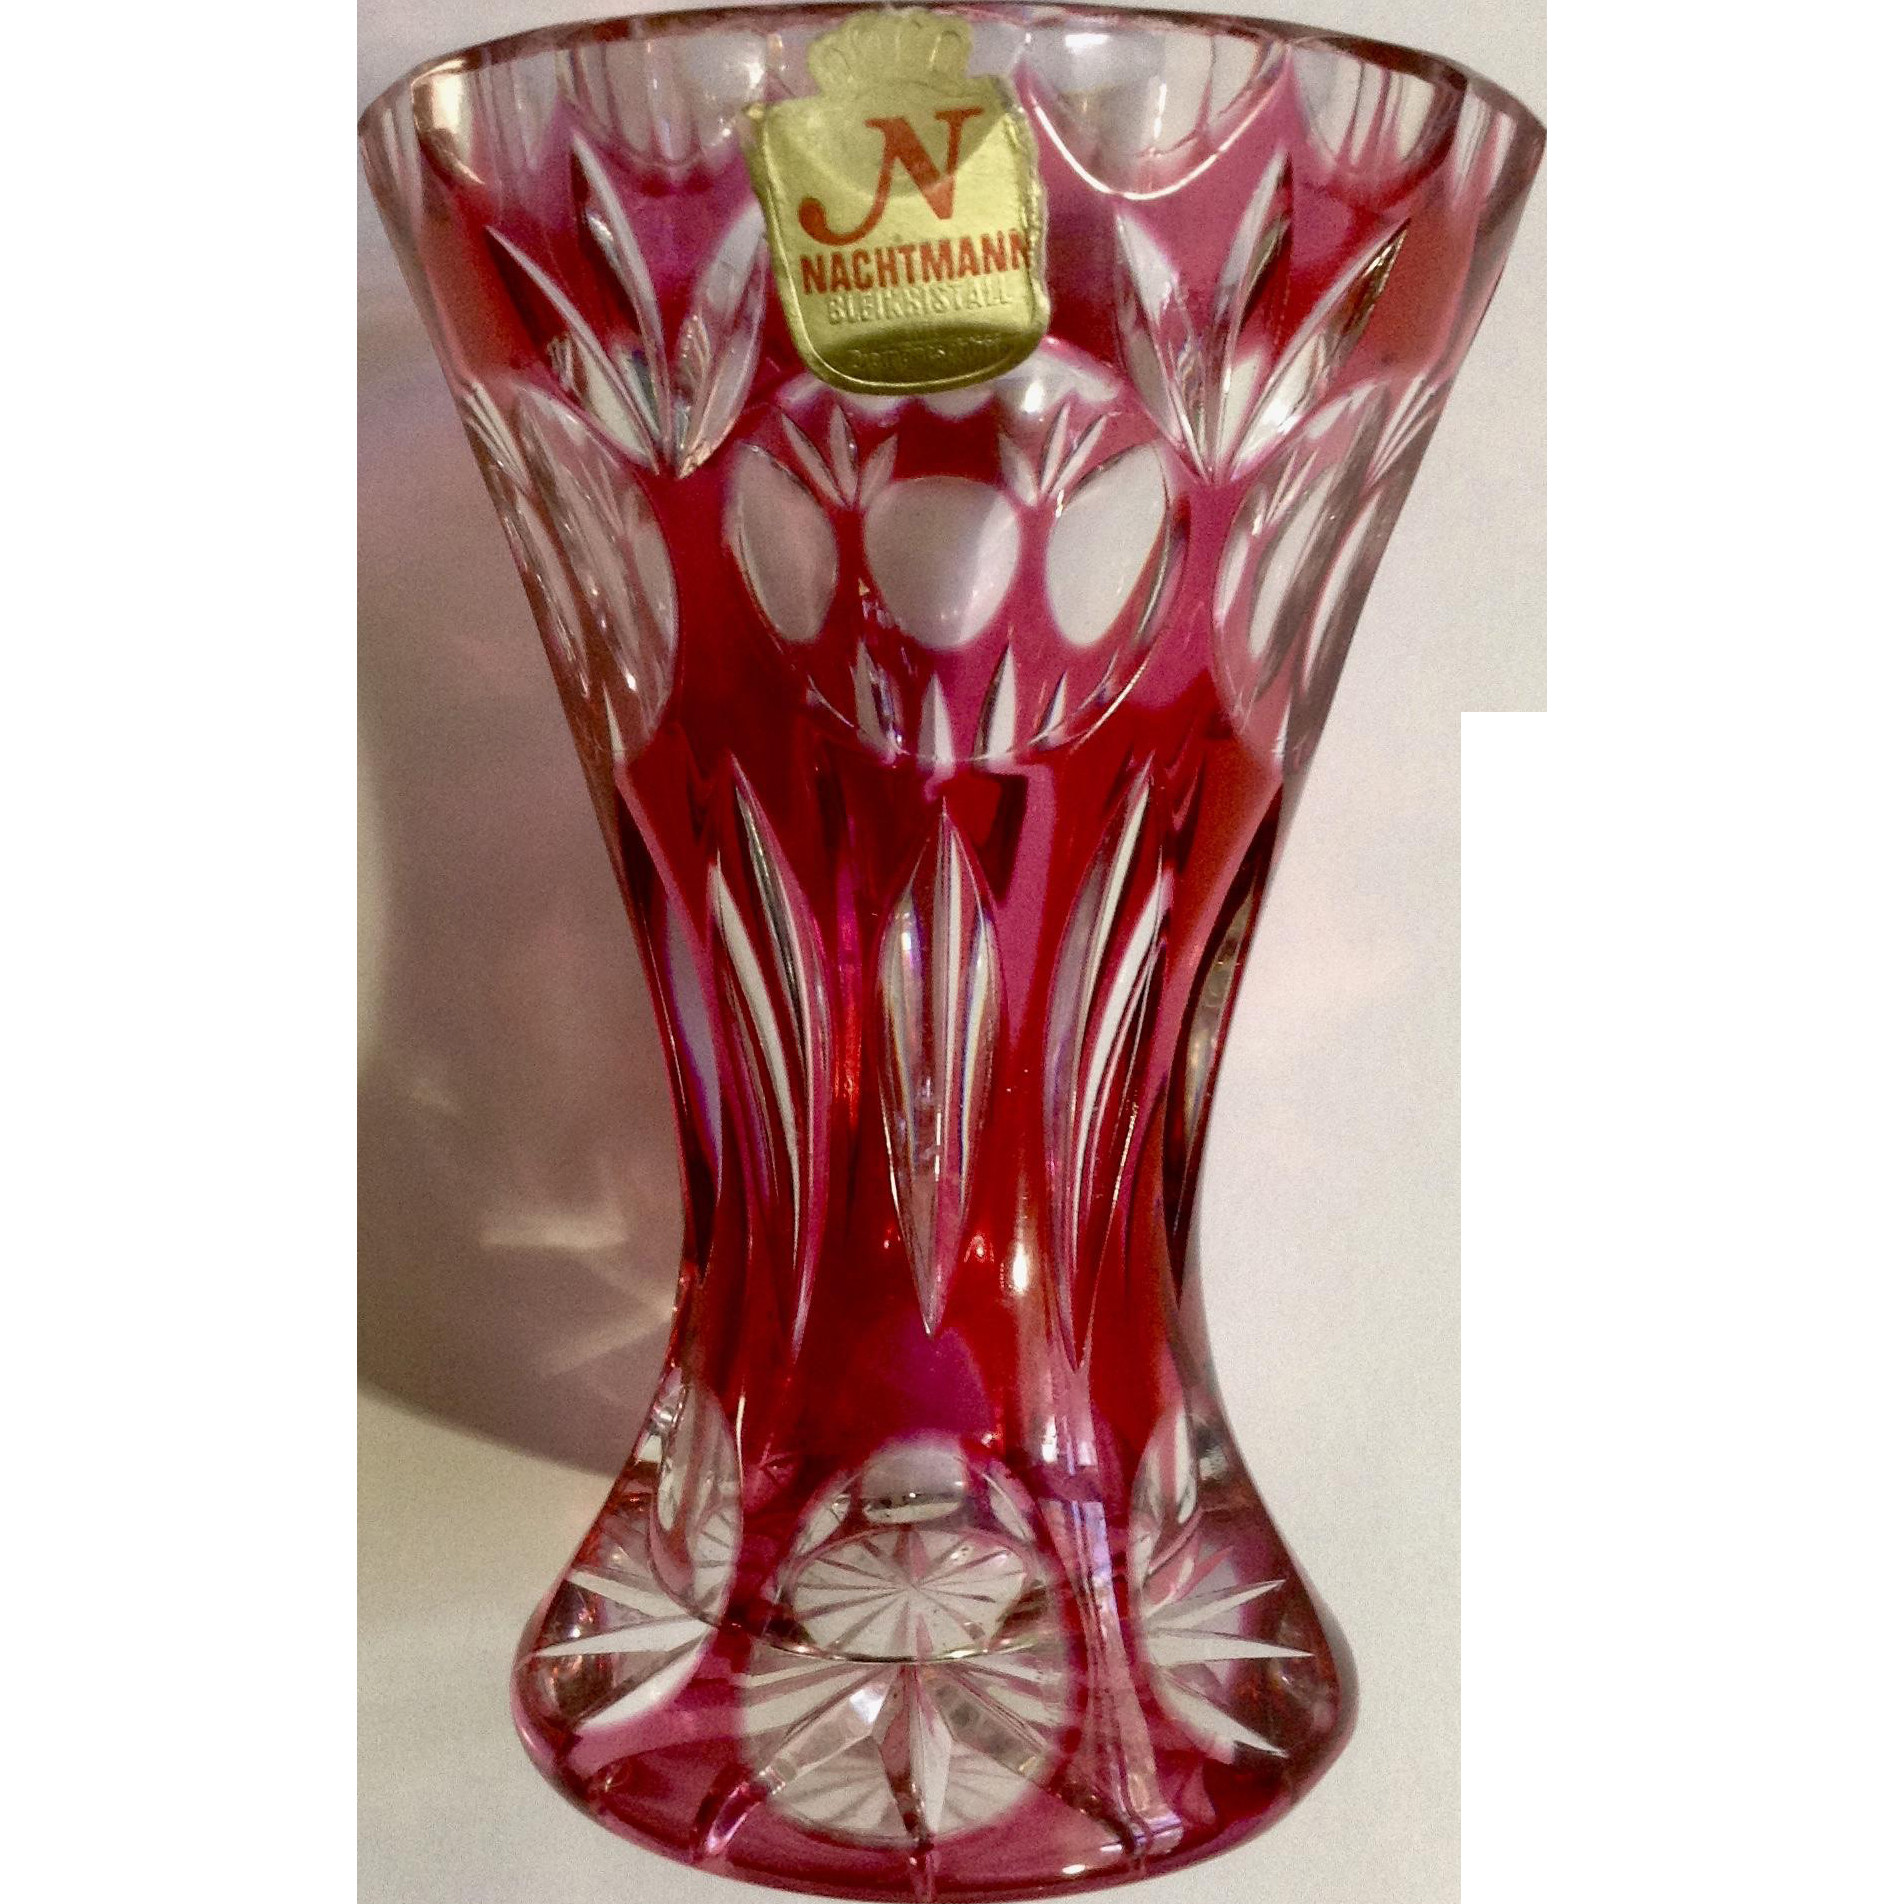 30 Recommended Hofbauer Red Bird Crystal Vase 2024 free download hofbauer red bird crystal vase of nachtmann bleikristall vase cranberry cut to clear 24 lead crystal within nachtmann bleikristall vase cranberry cut to clear 24 lead crystal circles ruby re